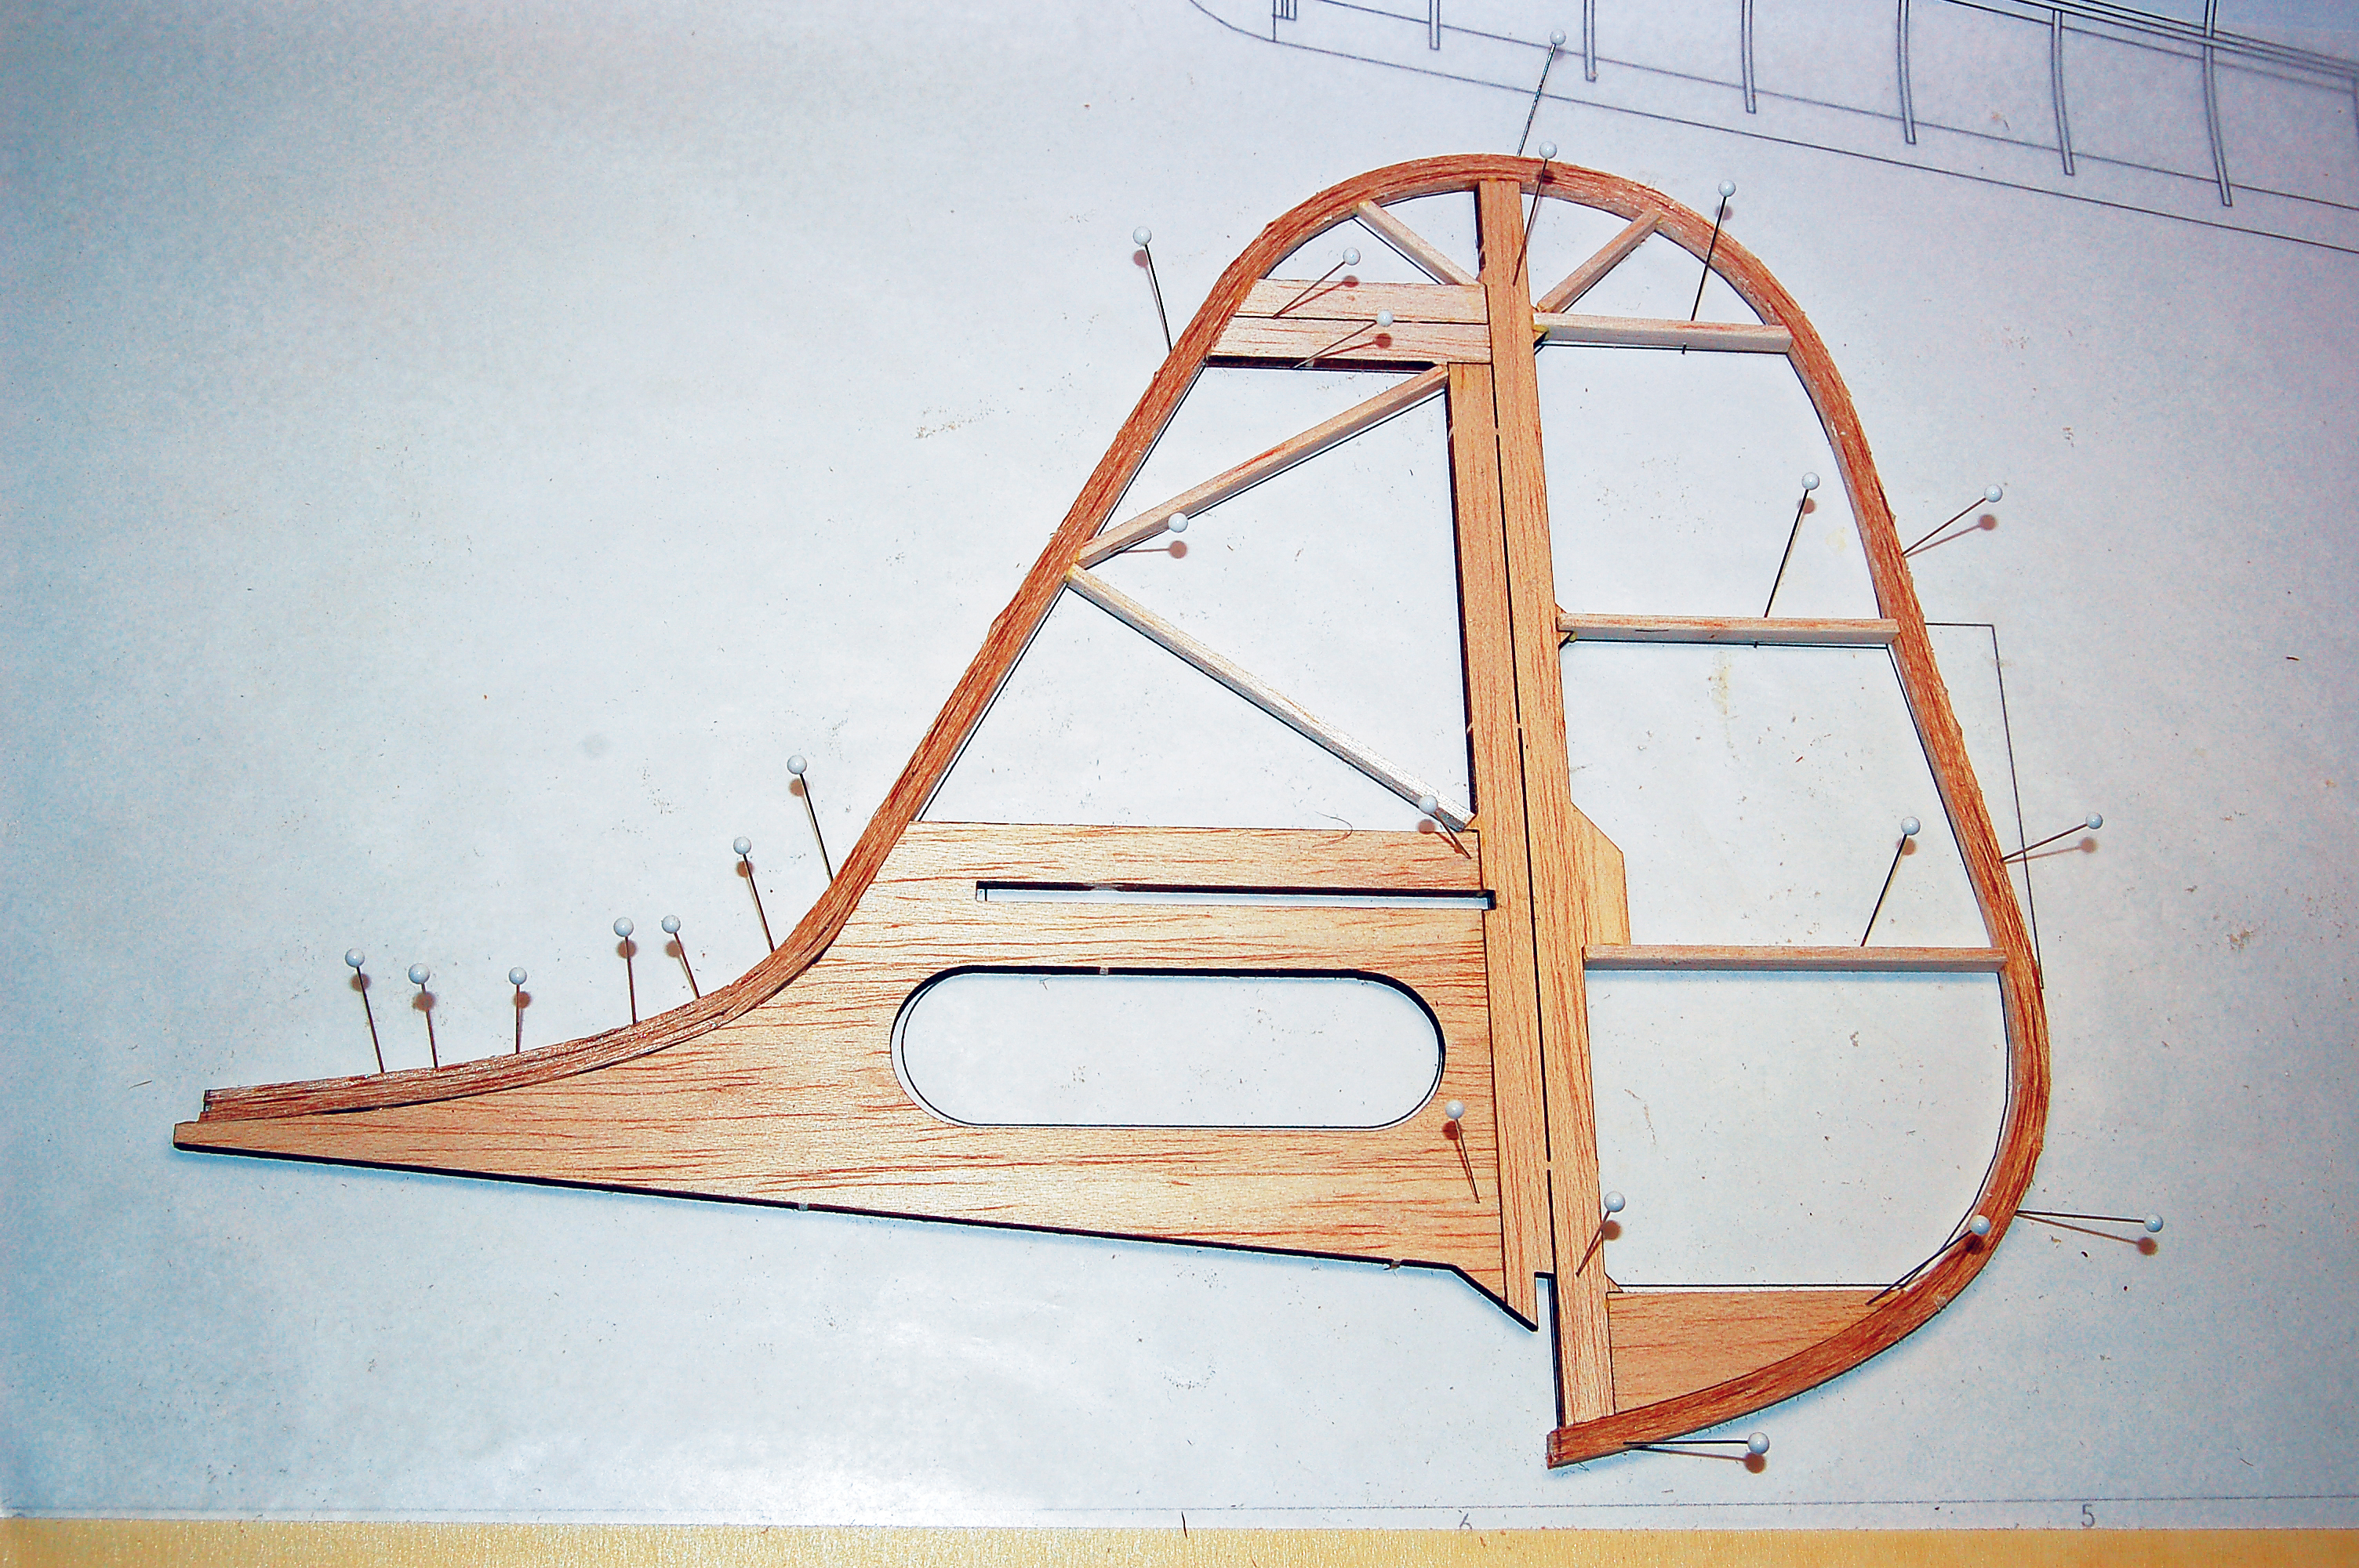 The fi n and rudder are framed and it’s up to the builder whether to sheet the tail or keep it at its lightest.